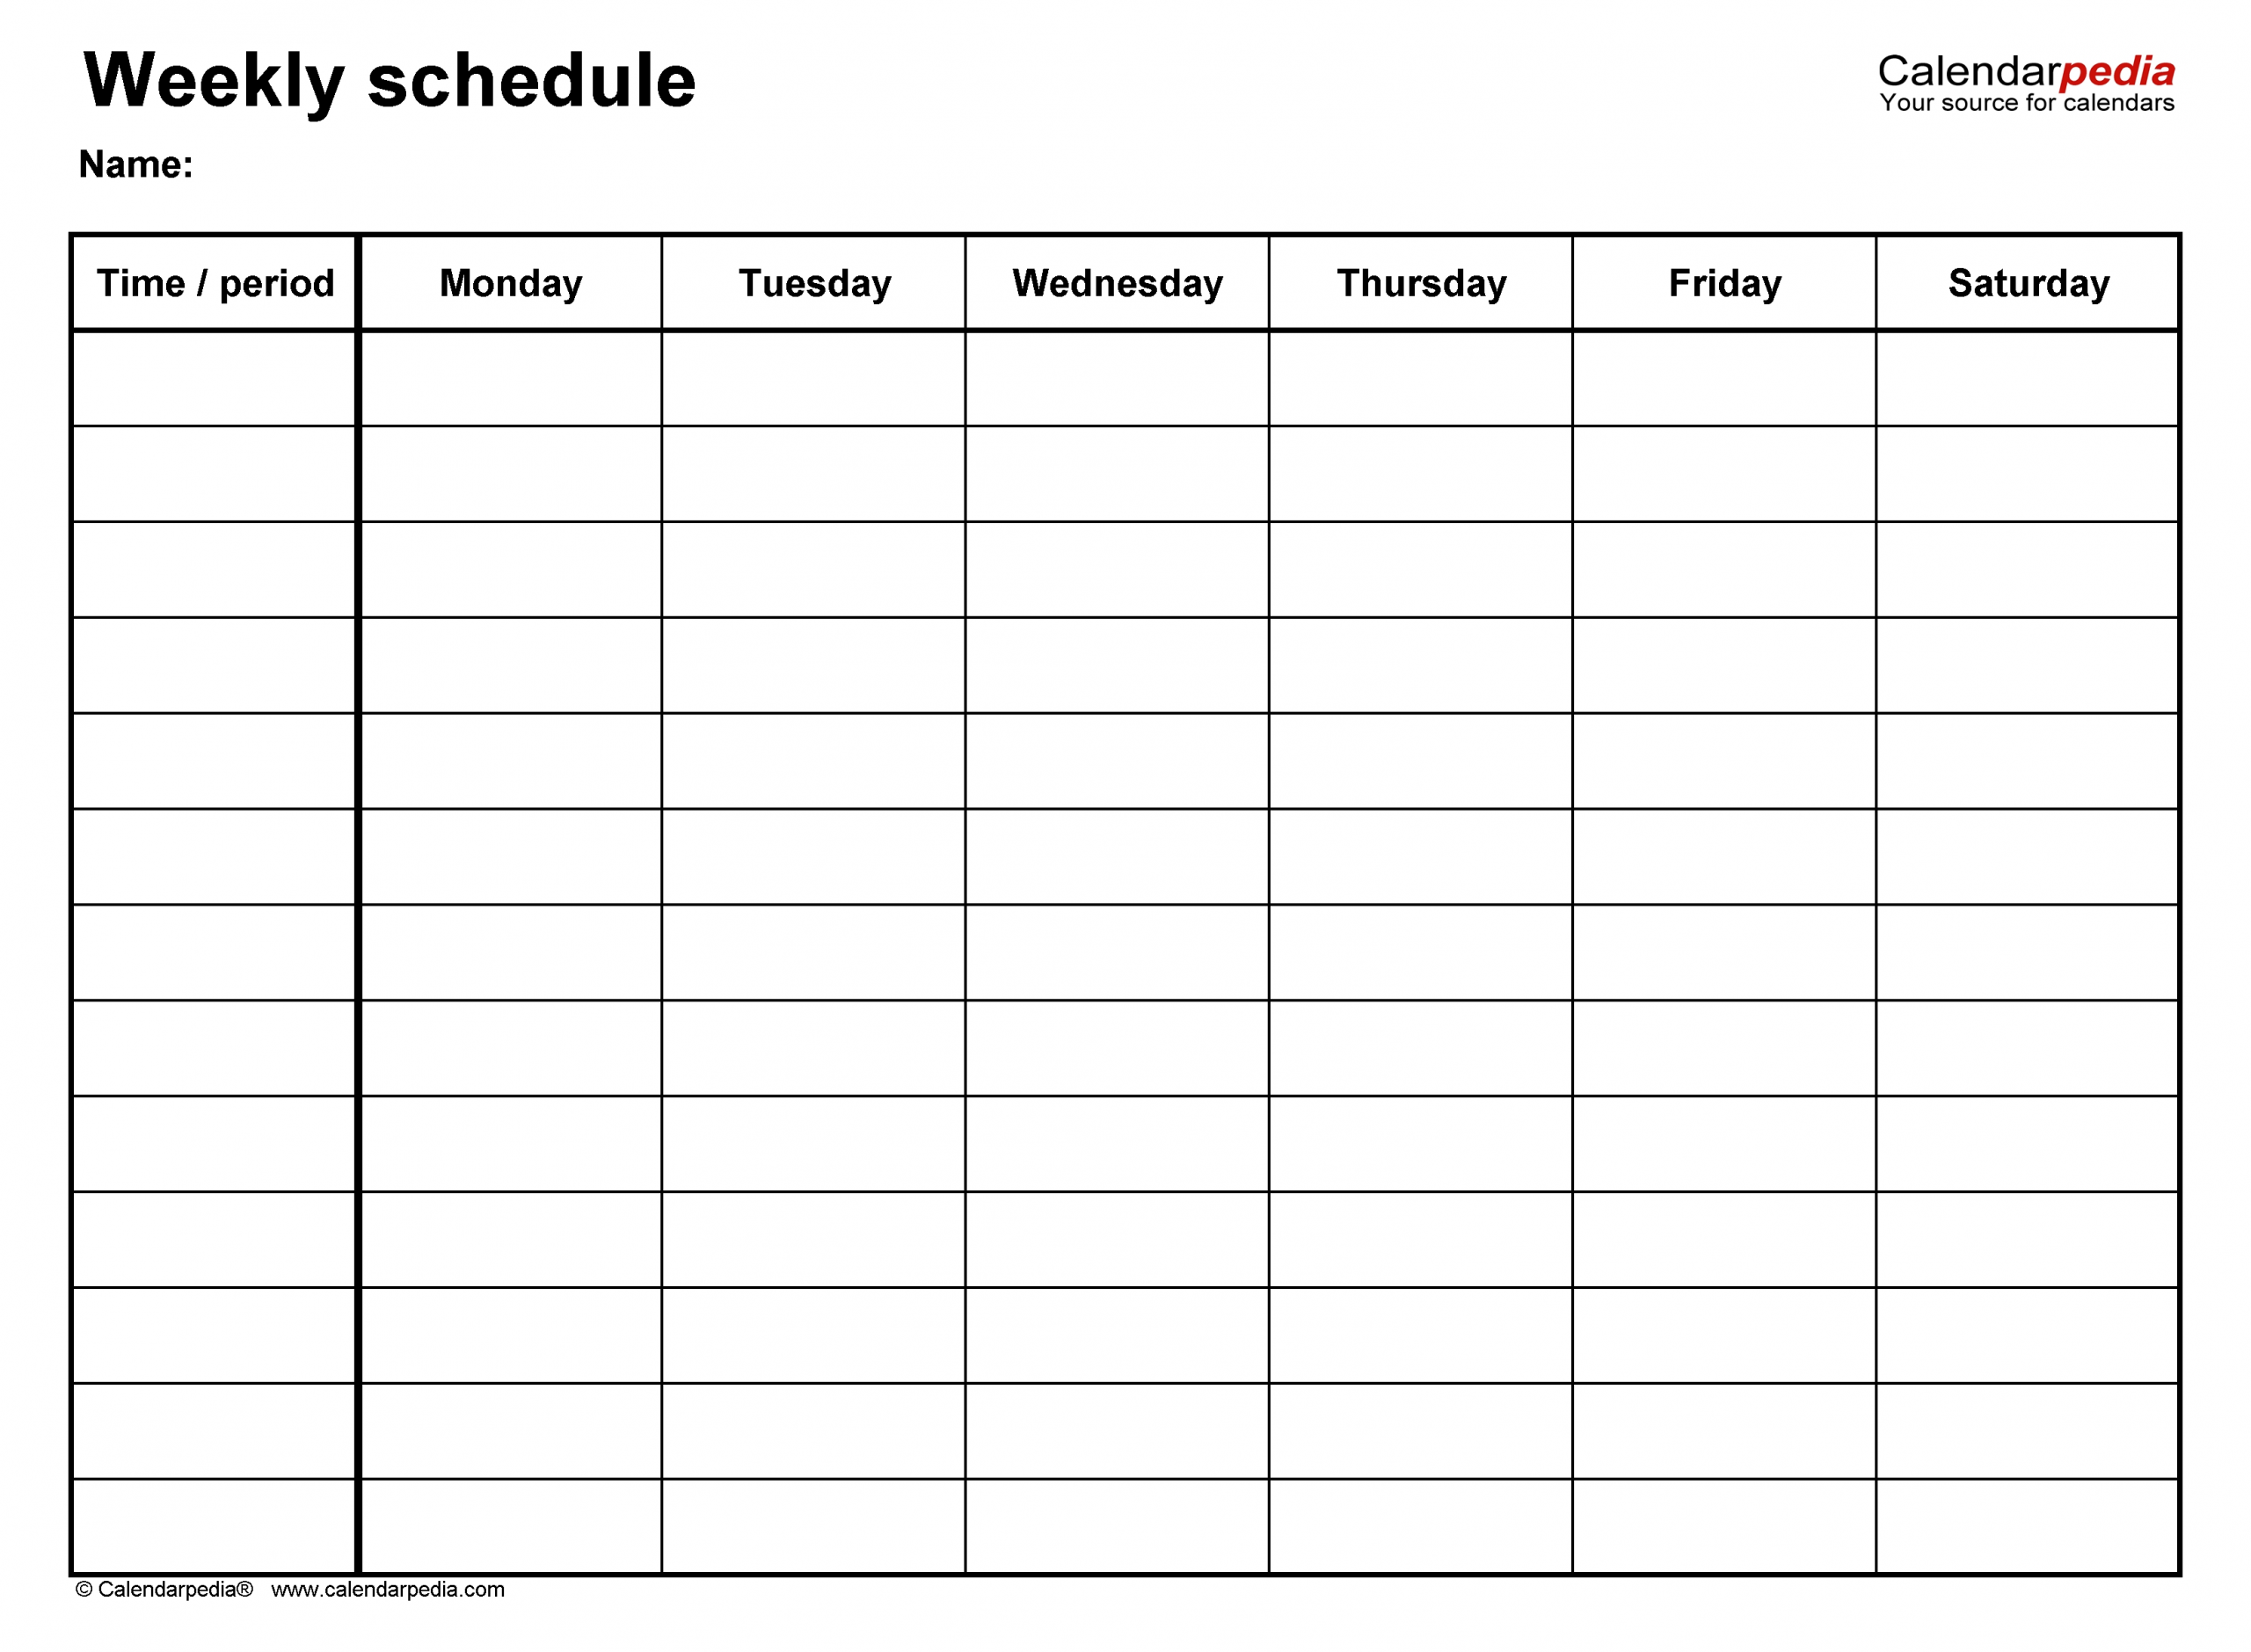 Collect Schedule For 4 People 6 Tasks Monday To Friday